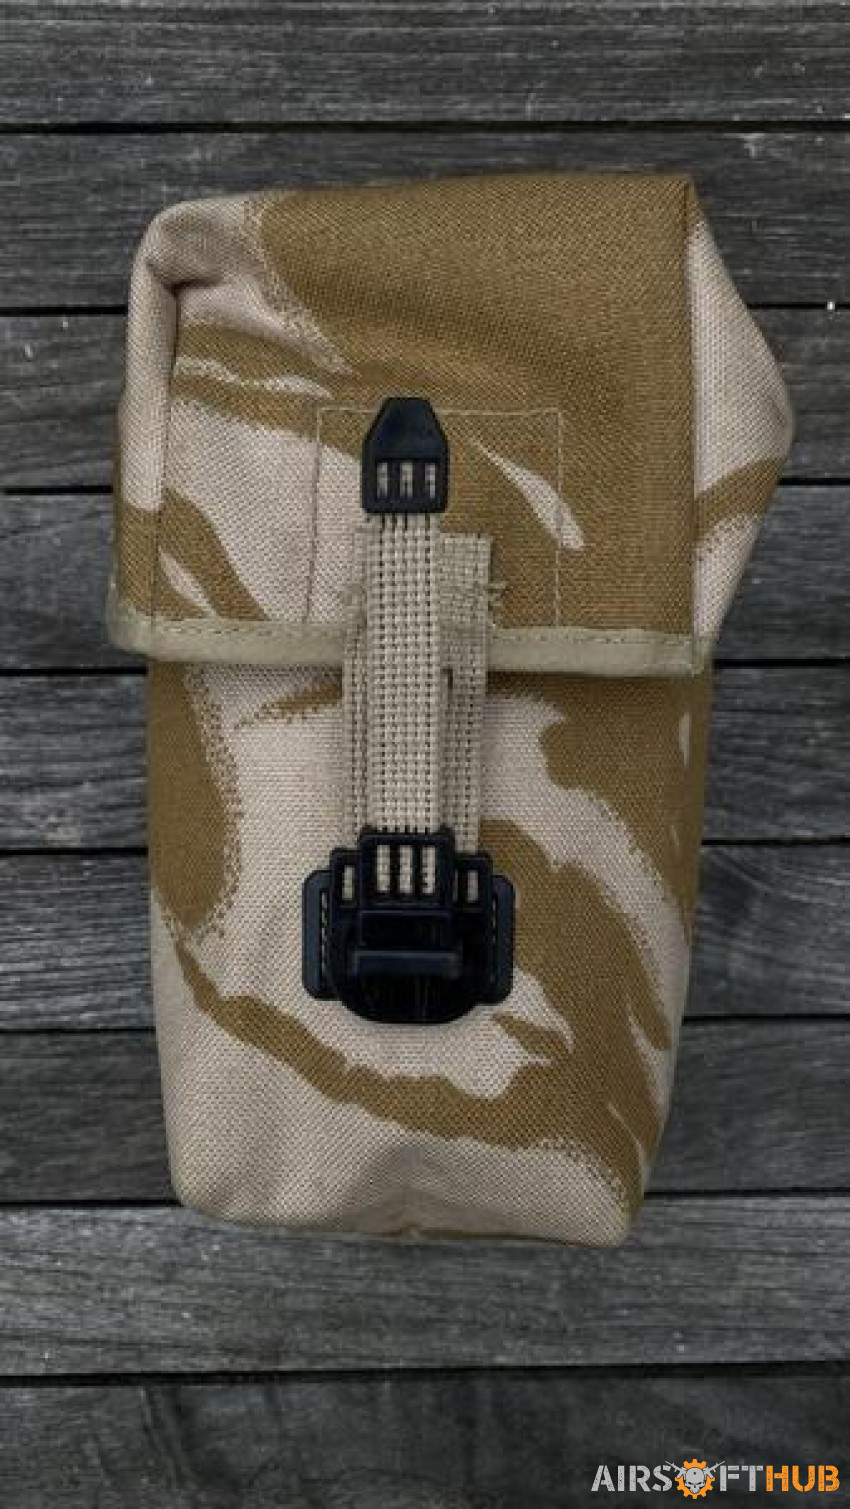 Desert DPM Utility pouches - Used airsoft equipment